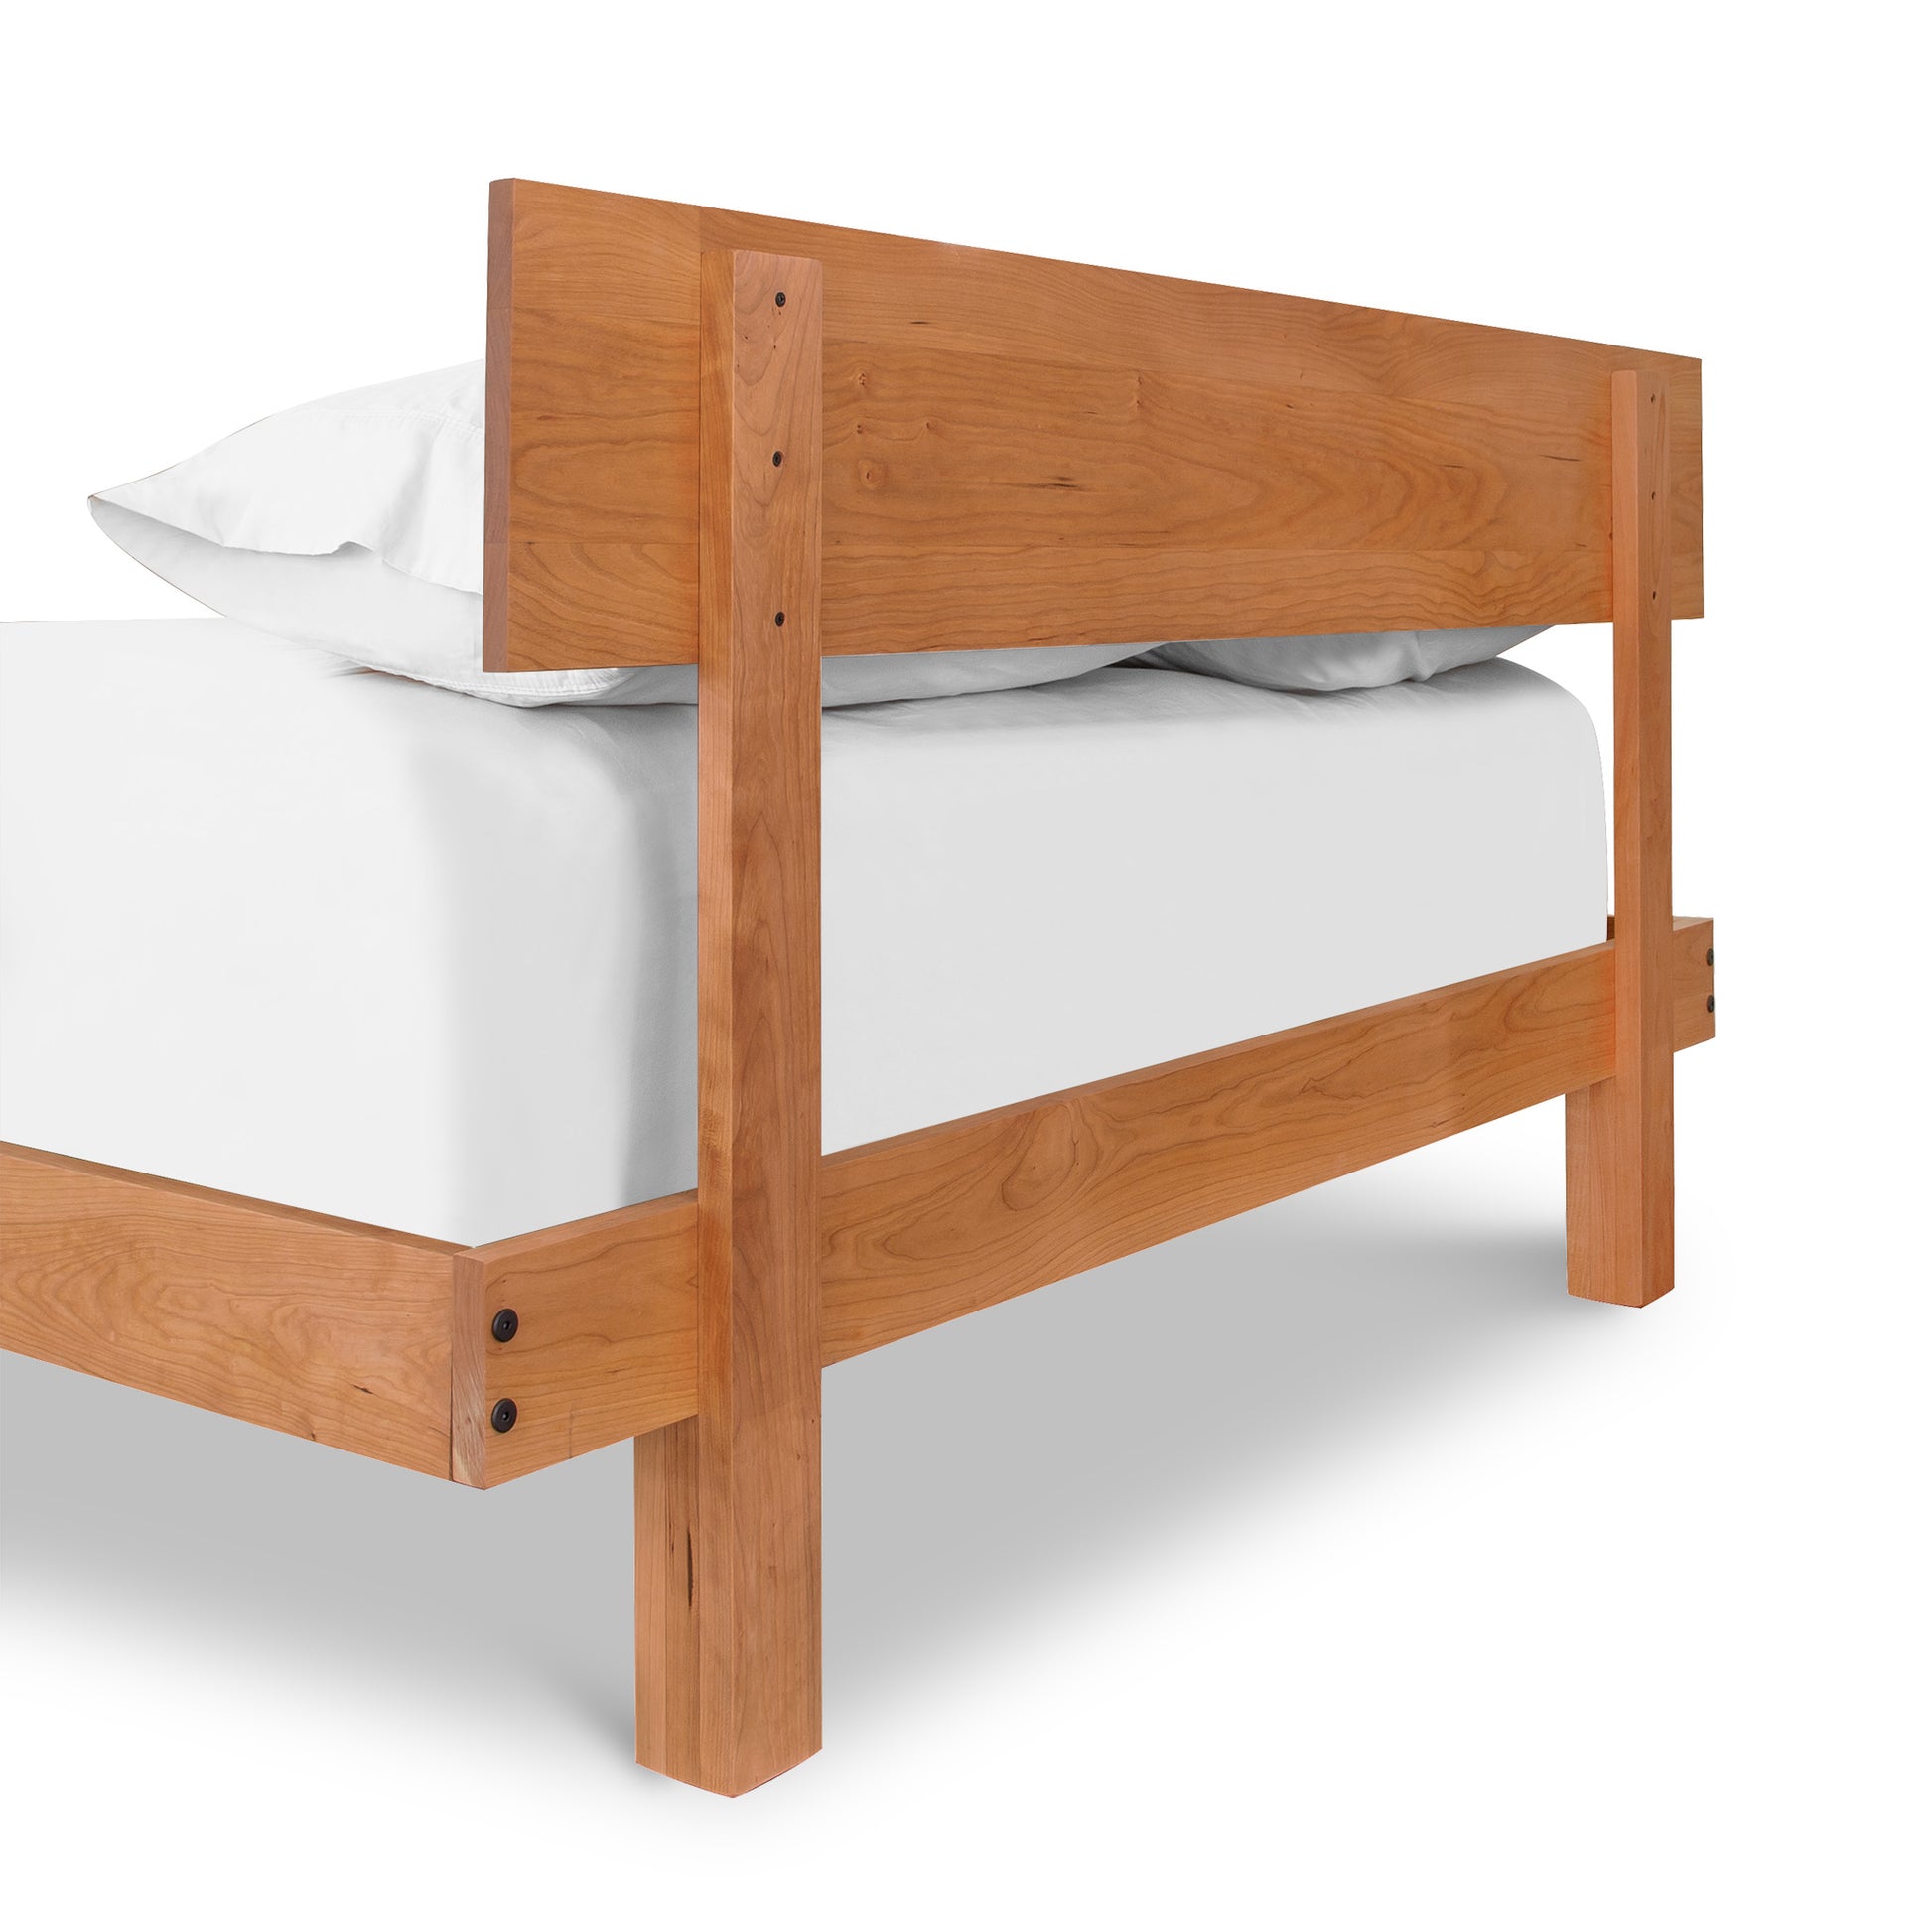 A Kipling Bed platform bed frame made of solid wood with white sheets on it. (brand name: Vermont Furniture Designs)